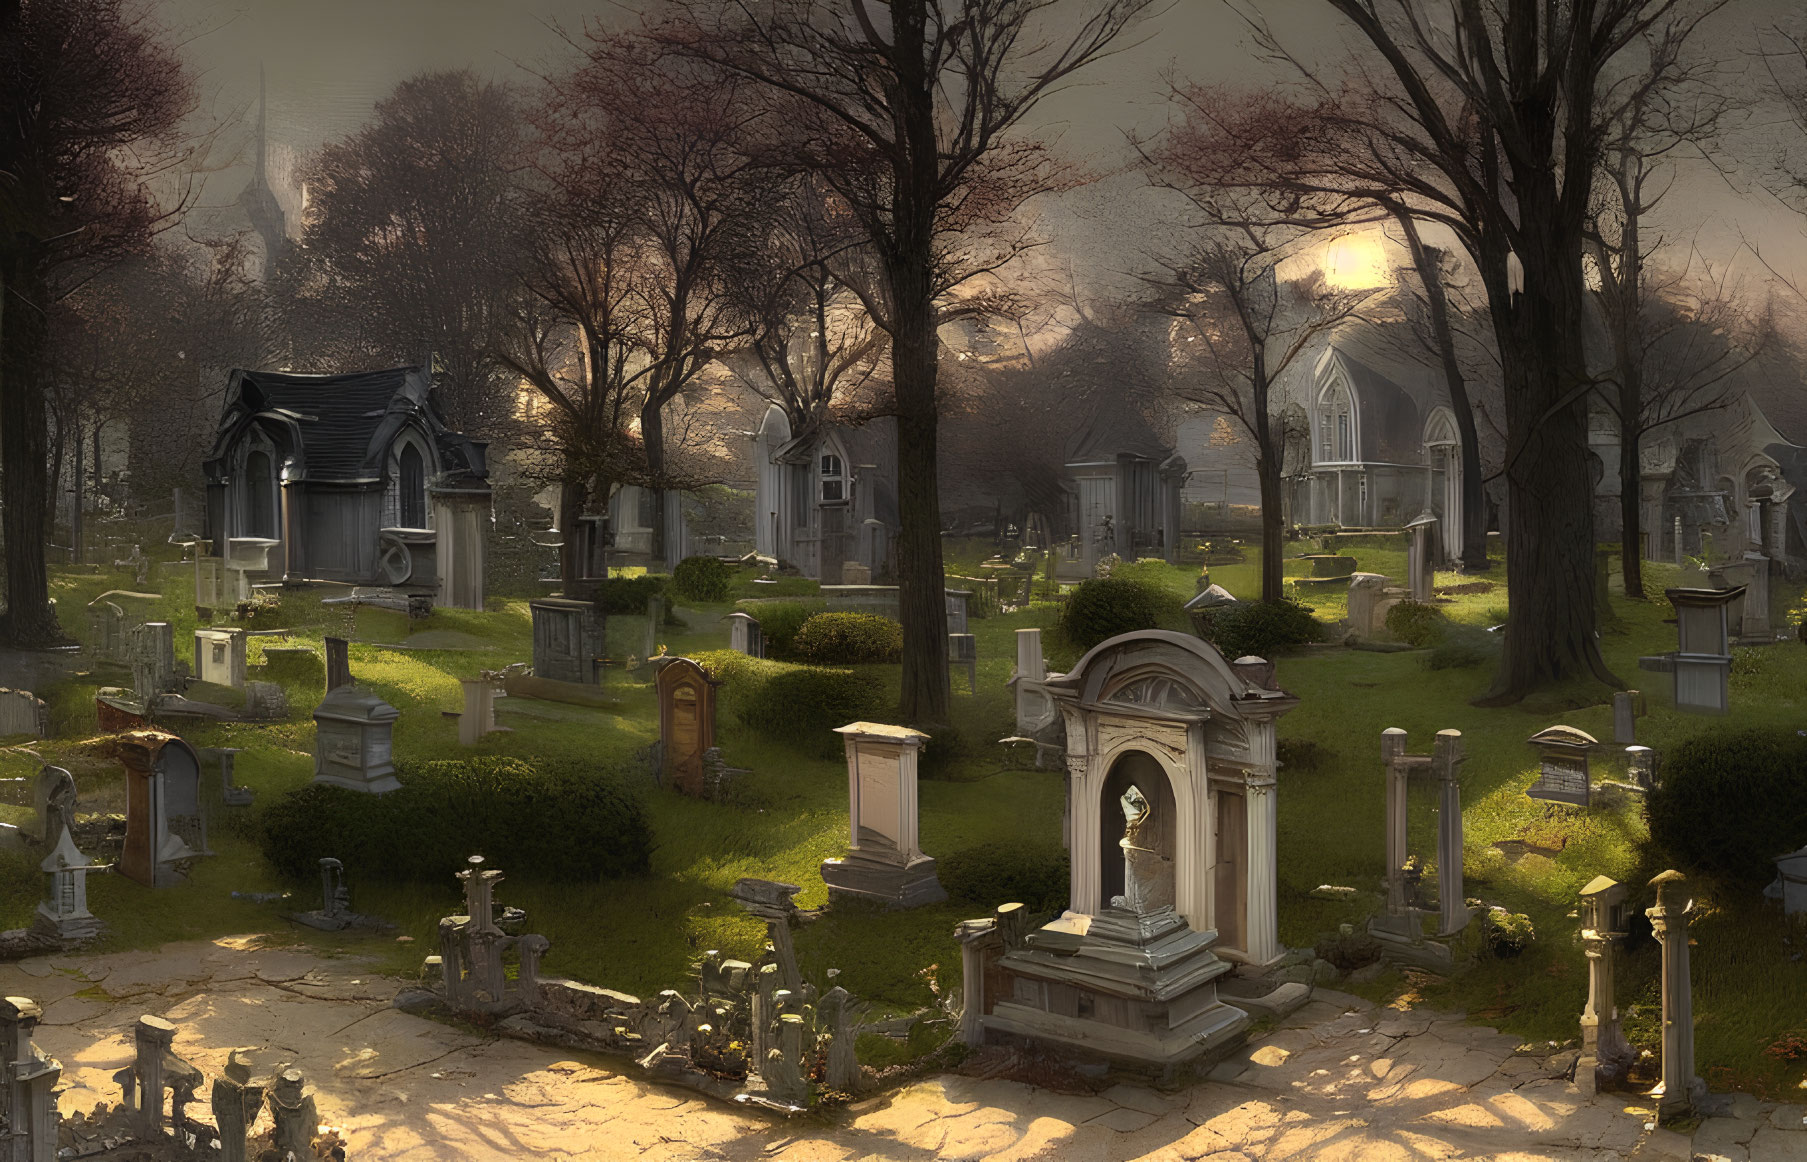 Misty graveyard with tombstones, statues, mausoleums, and autumn trees